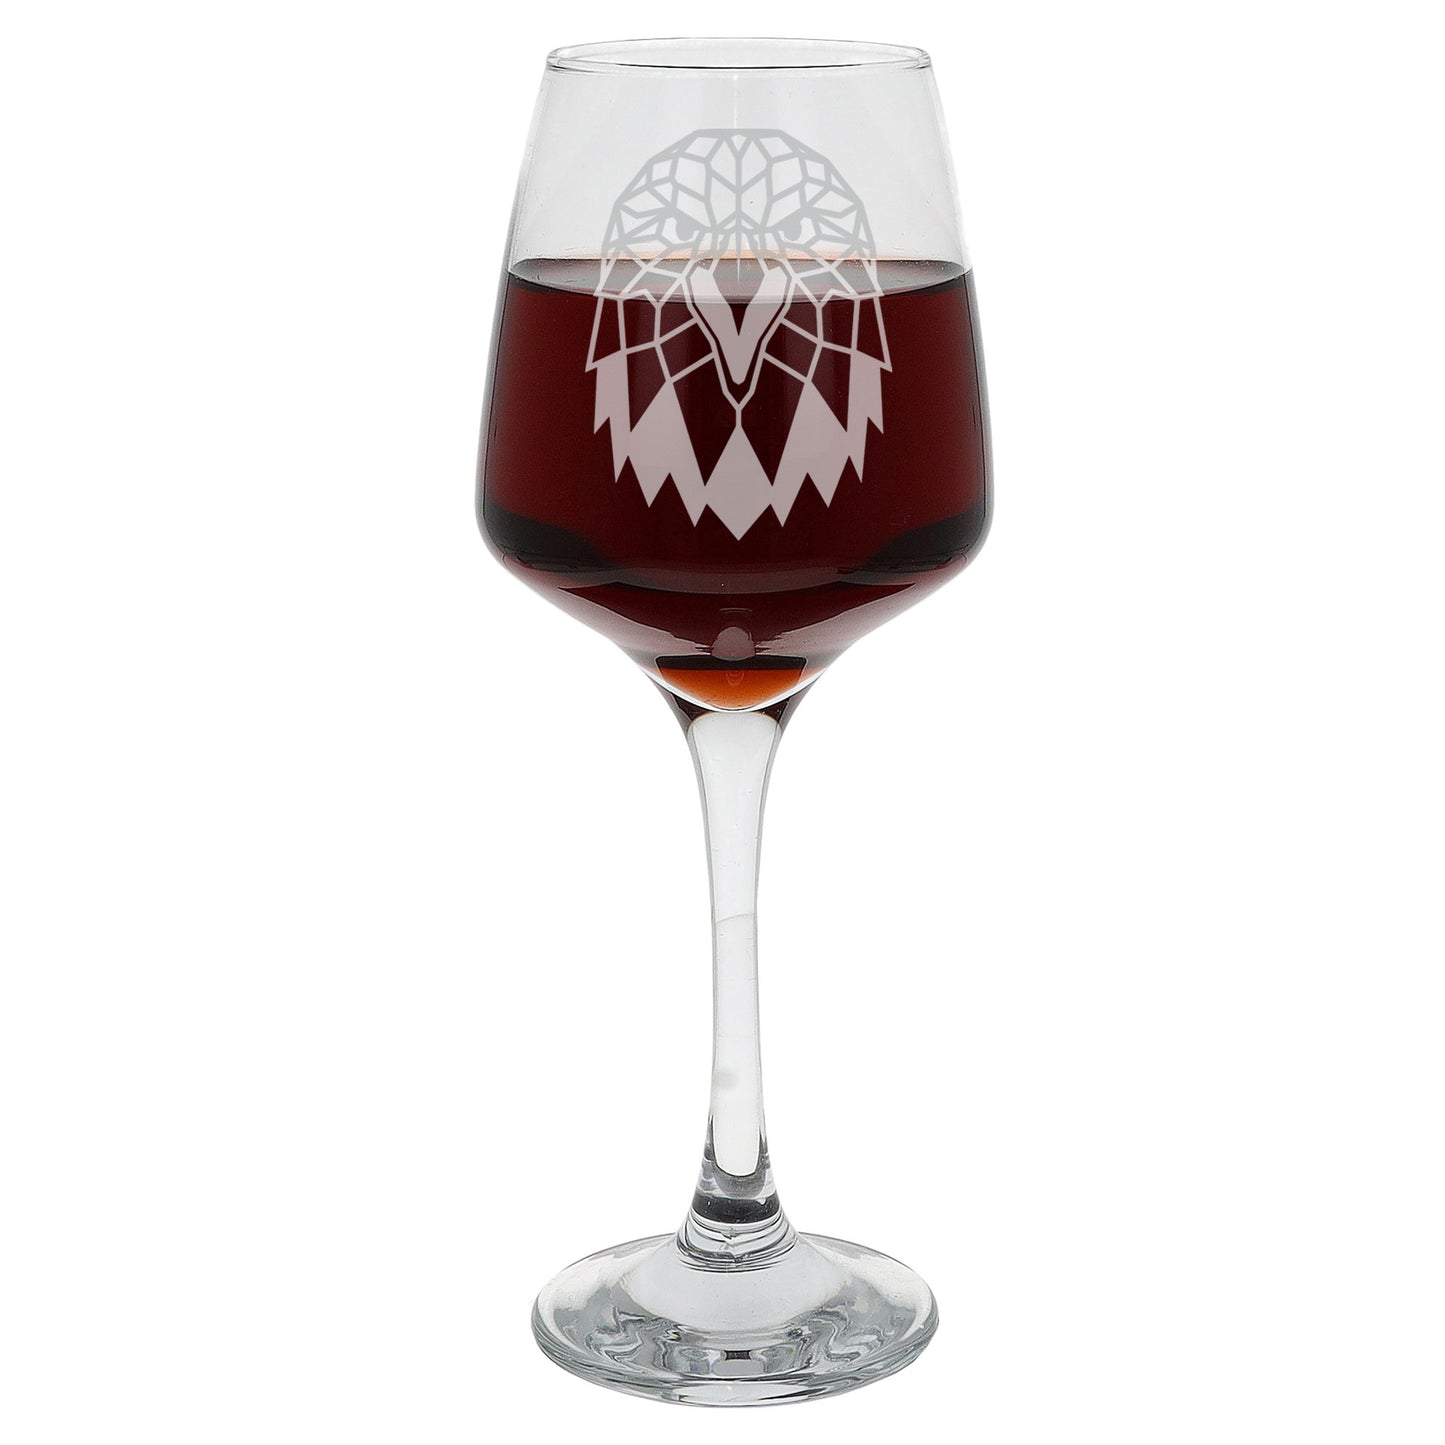 Eagle Engraved Wine Glass  - Always Looking Good -   